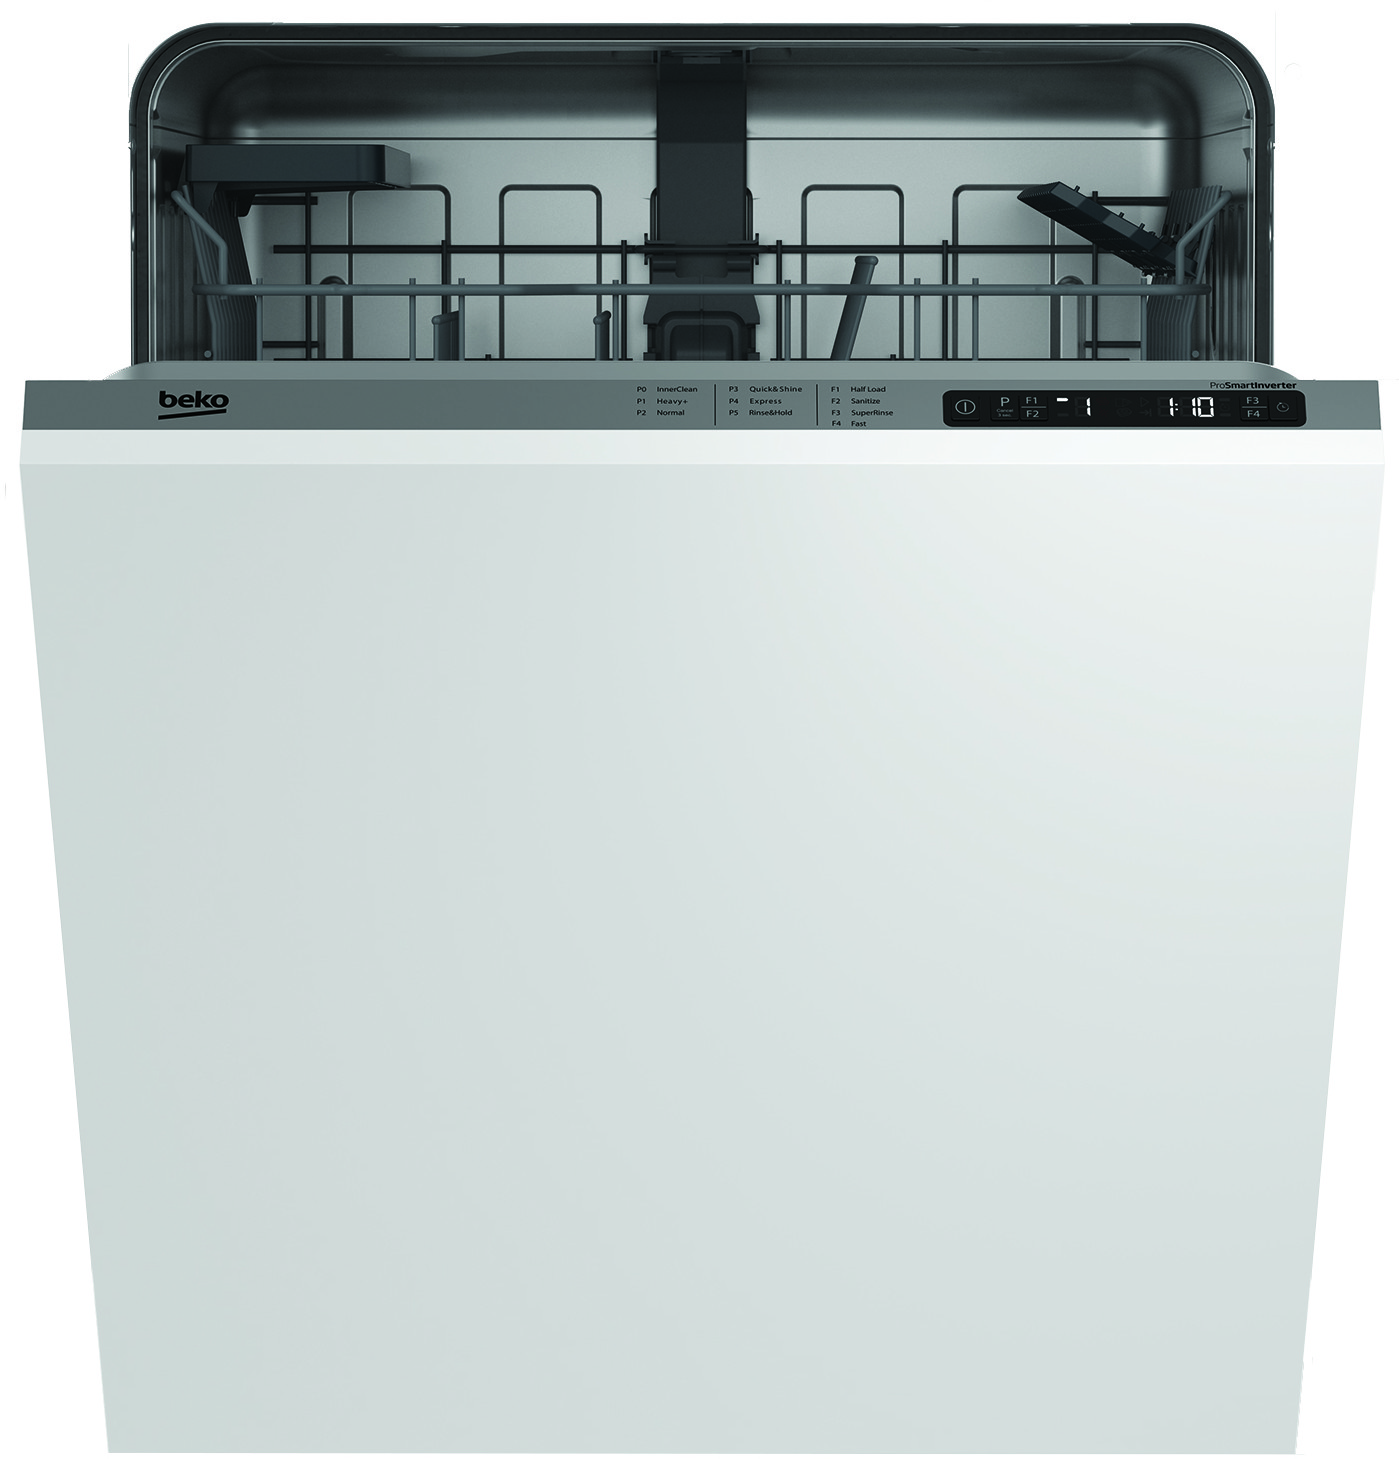 Beko 24 Fully Integrated Tall-Tub Dishwasher DIN25401